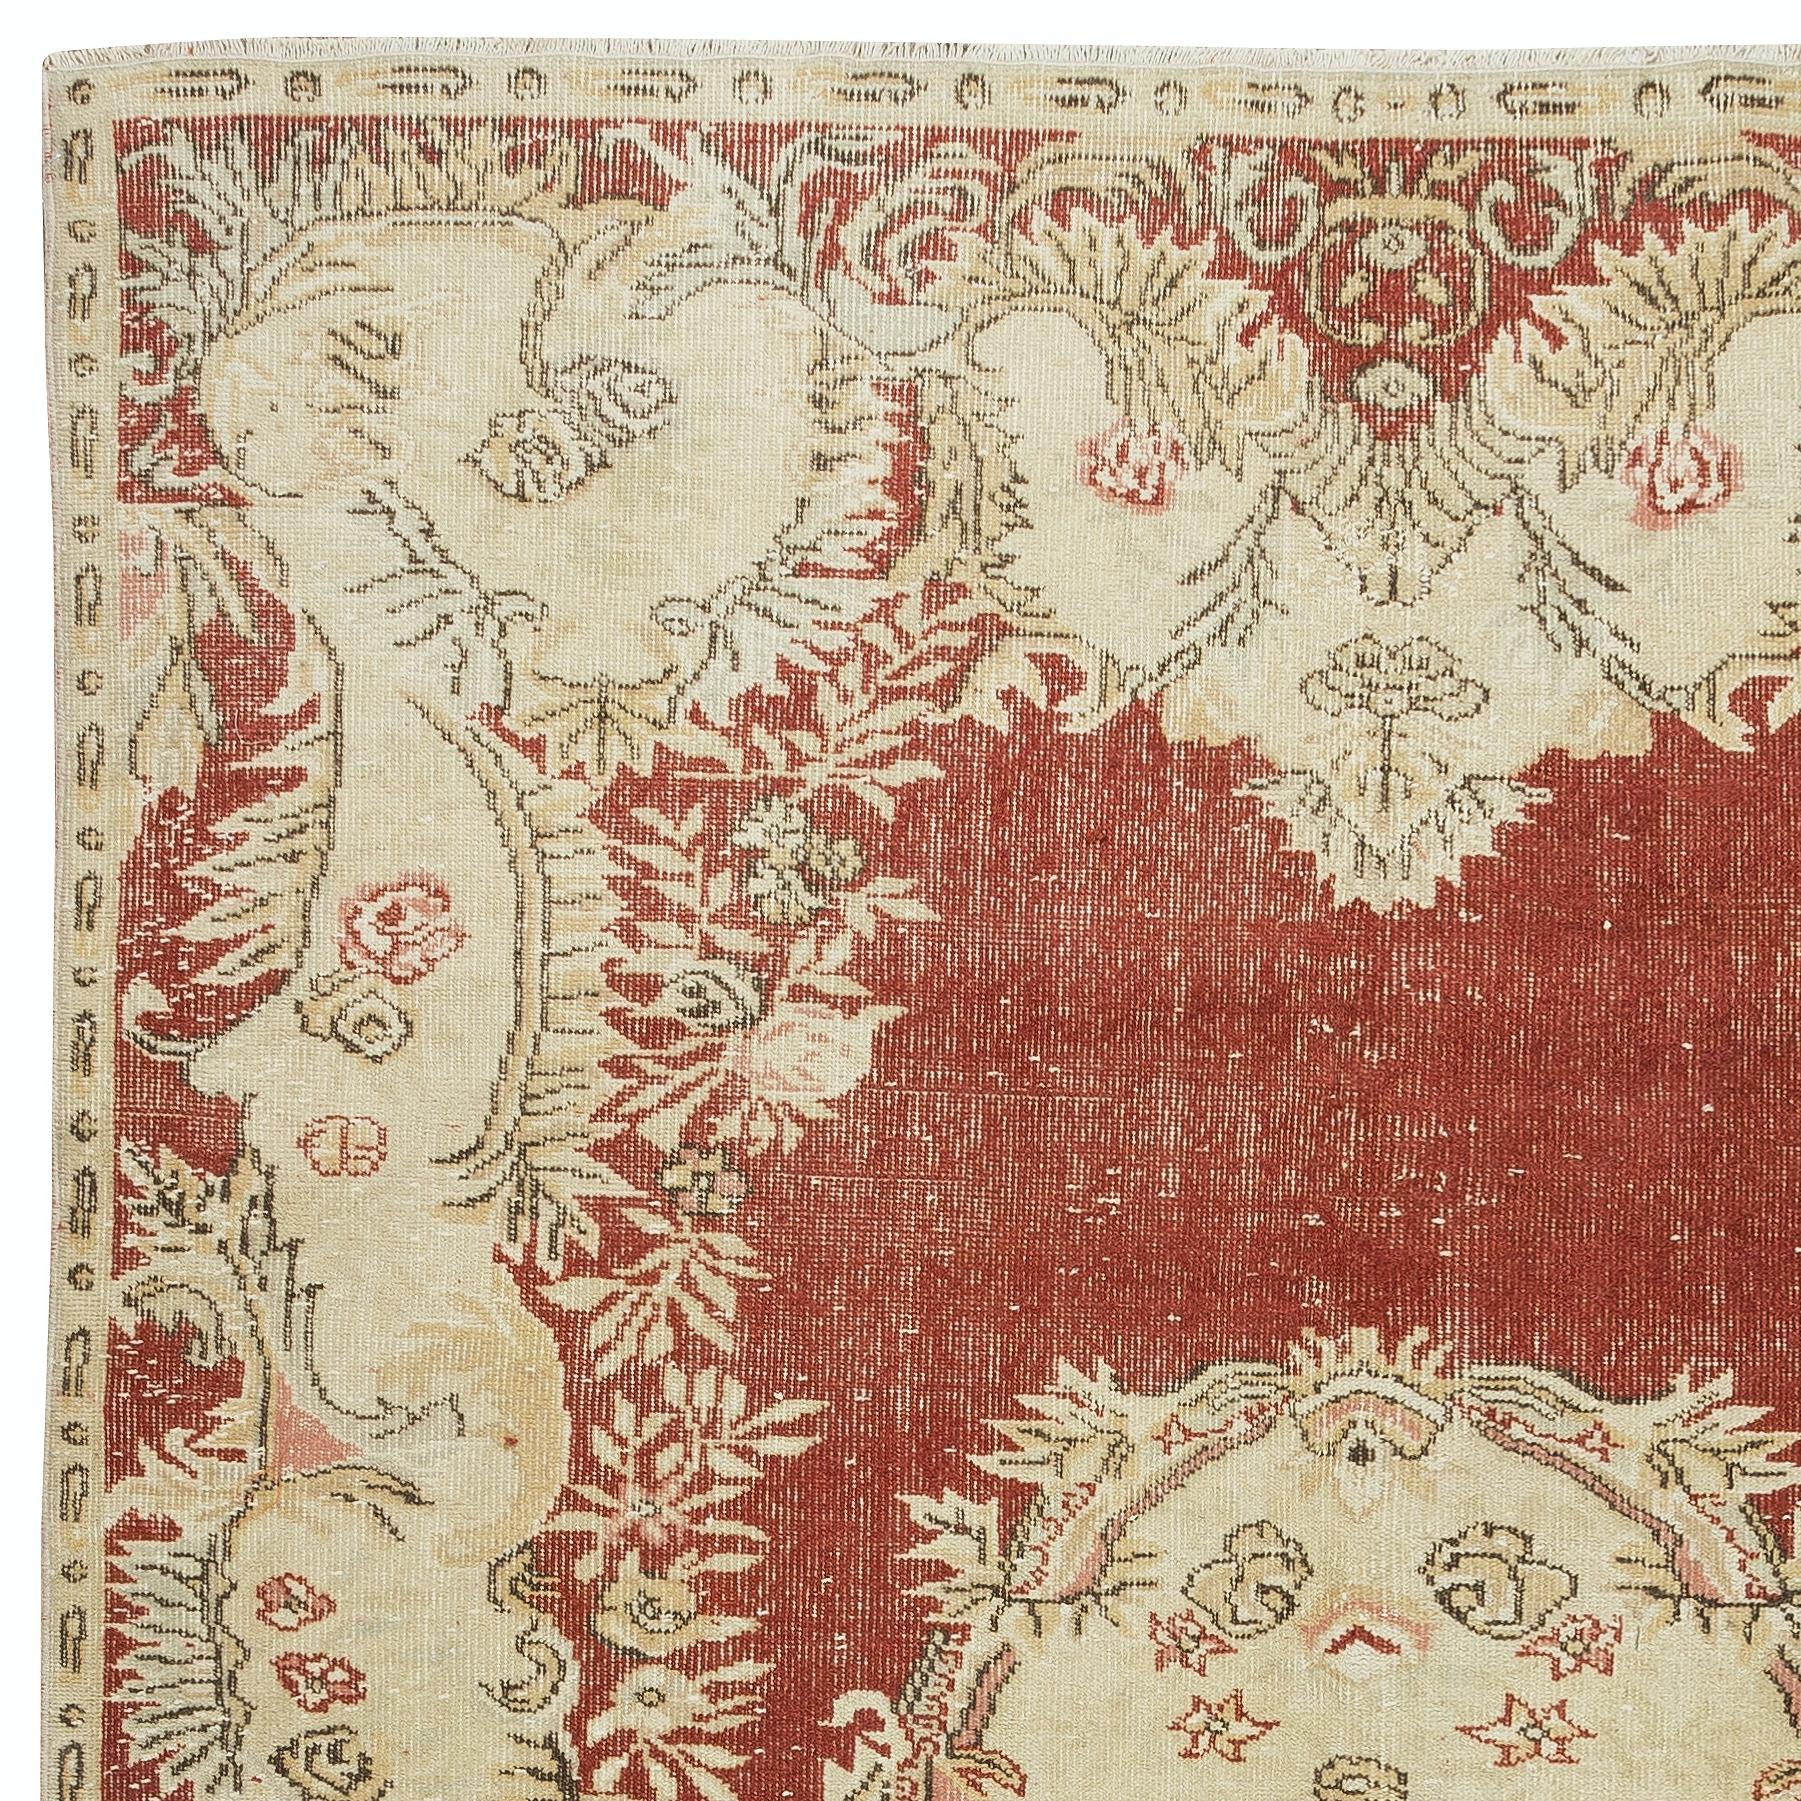 Turkish 6.3x10 ft One-of-a-kind Vintage Handmade Anatolian Area Rug in Red & Beige For Sale